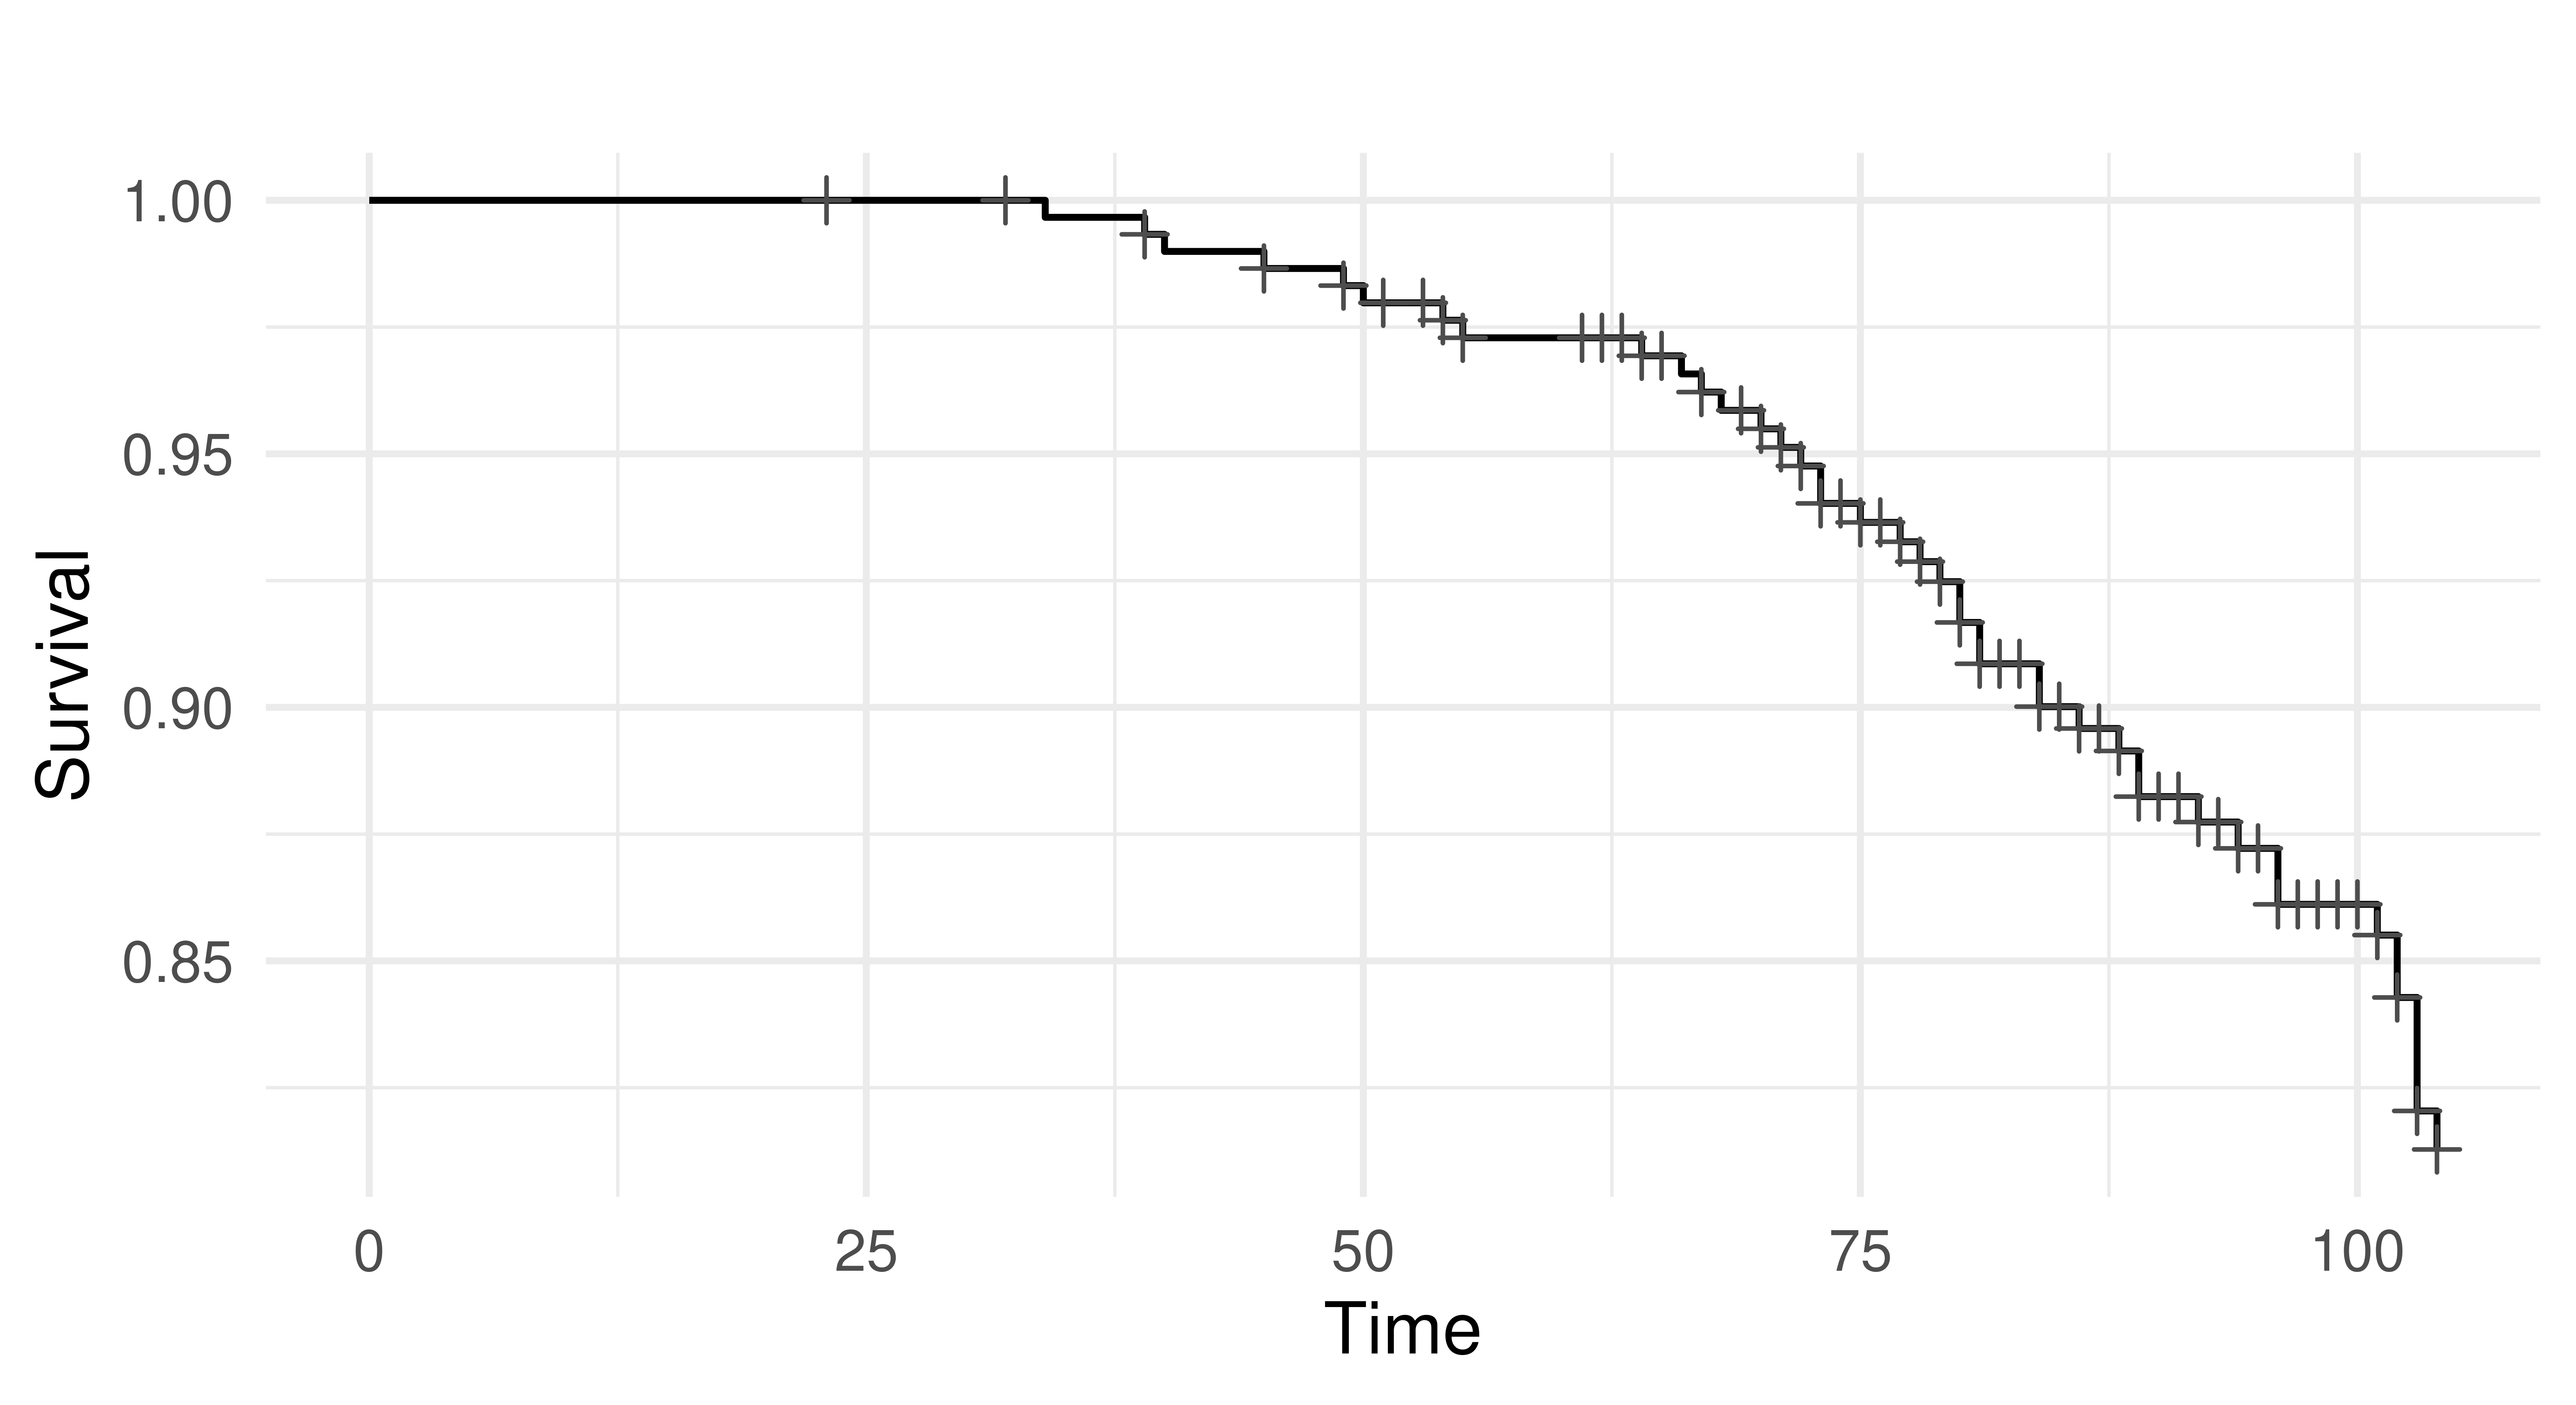 Figure shows a line plot with "Time" on the x-axis from 0 to 100 and "Survival" on the y-axis from 0.80 to 1.00. The line plot is a black line from (0, 1) to (25, 1) then starts to drop slowly and then quickly down to (100, 0.80).